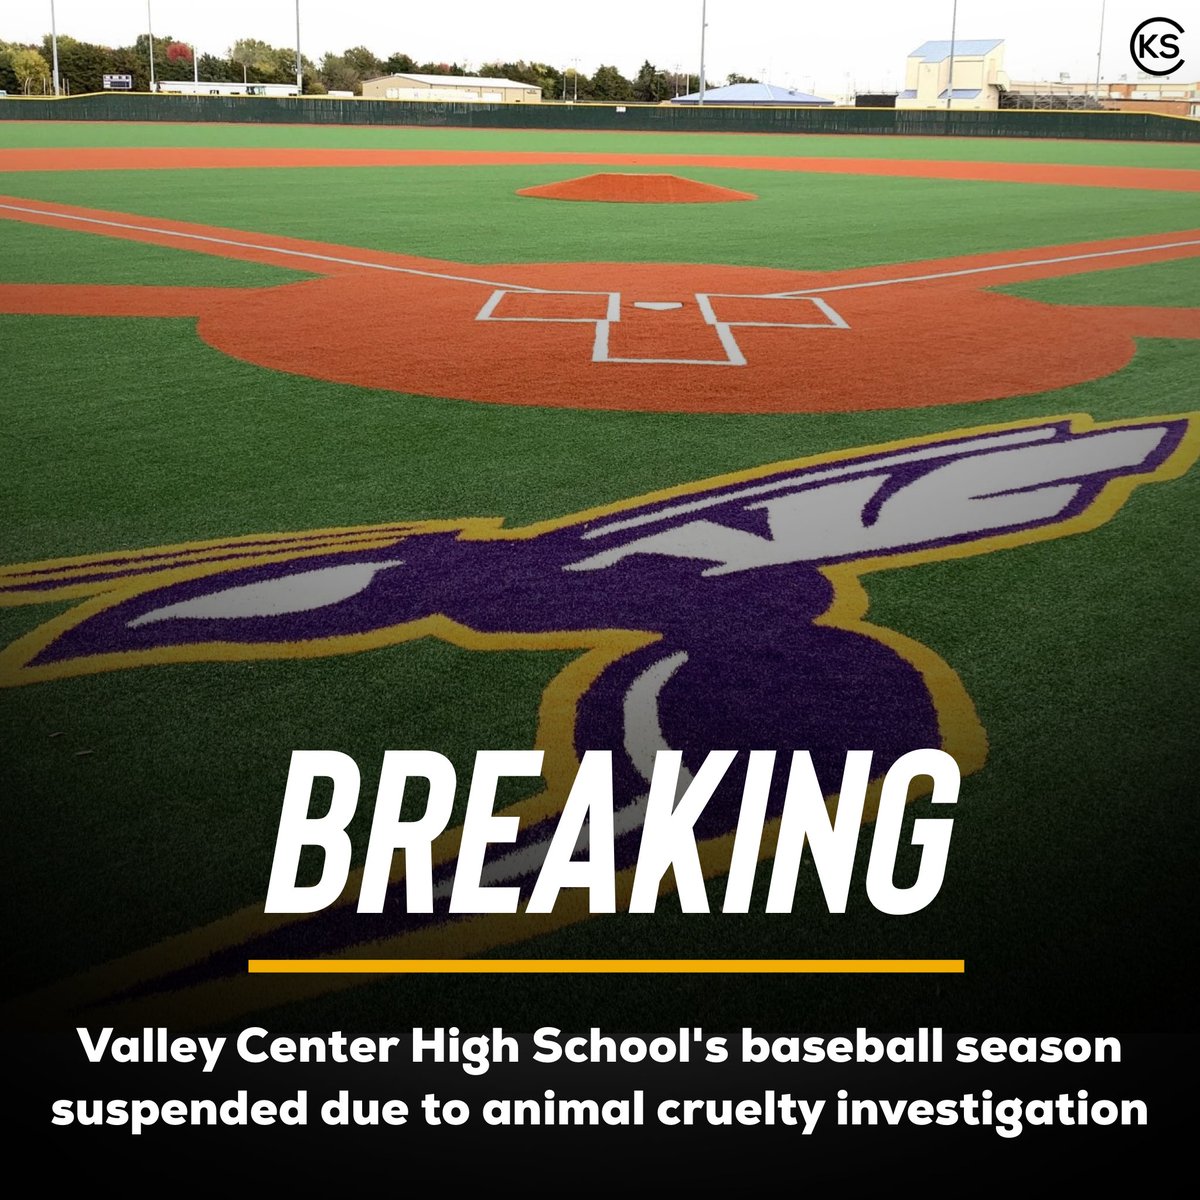 Valley Center’s baseball season suspended as the USD 262 school district said the varsity baseball team and its coaching staff are under investigation for animal cruelty